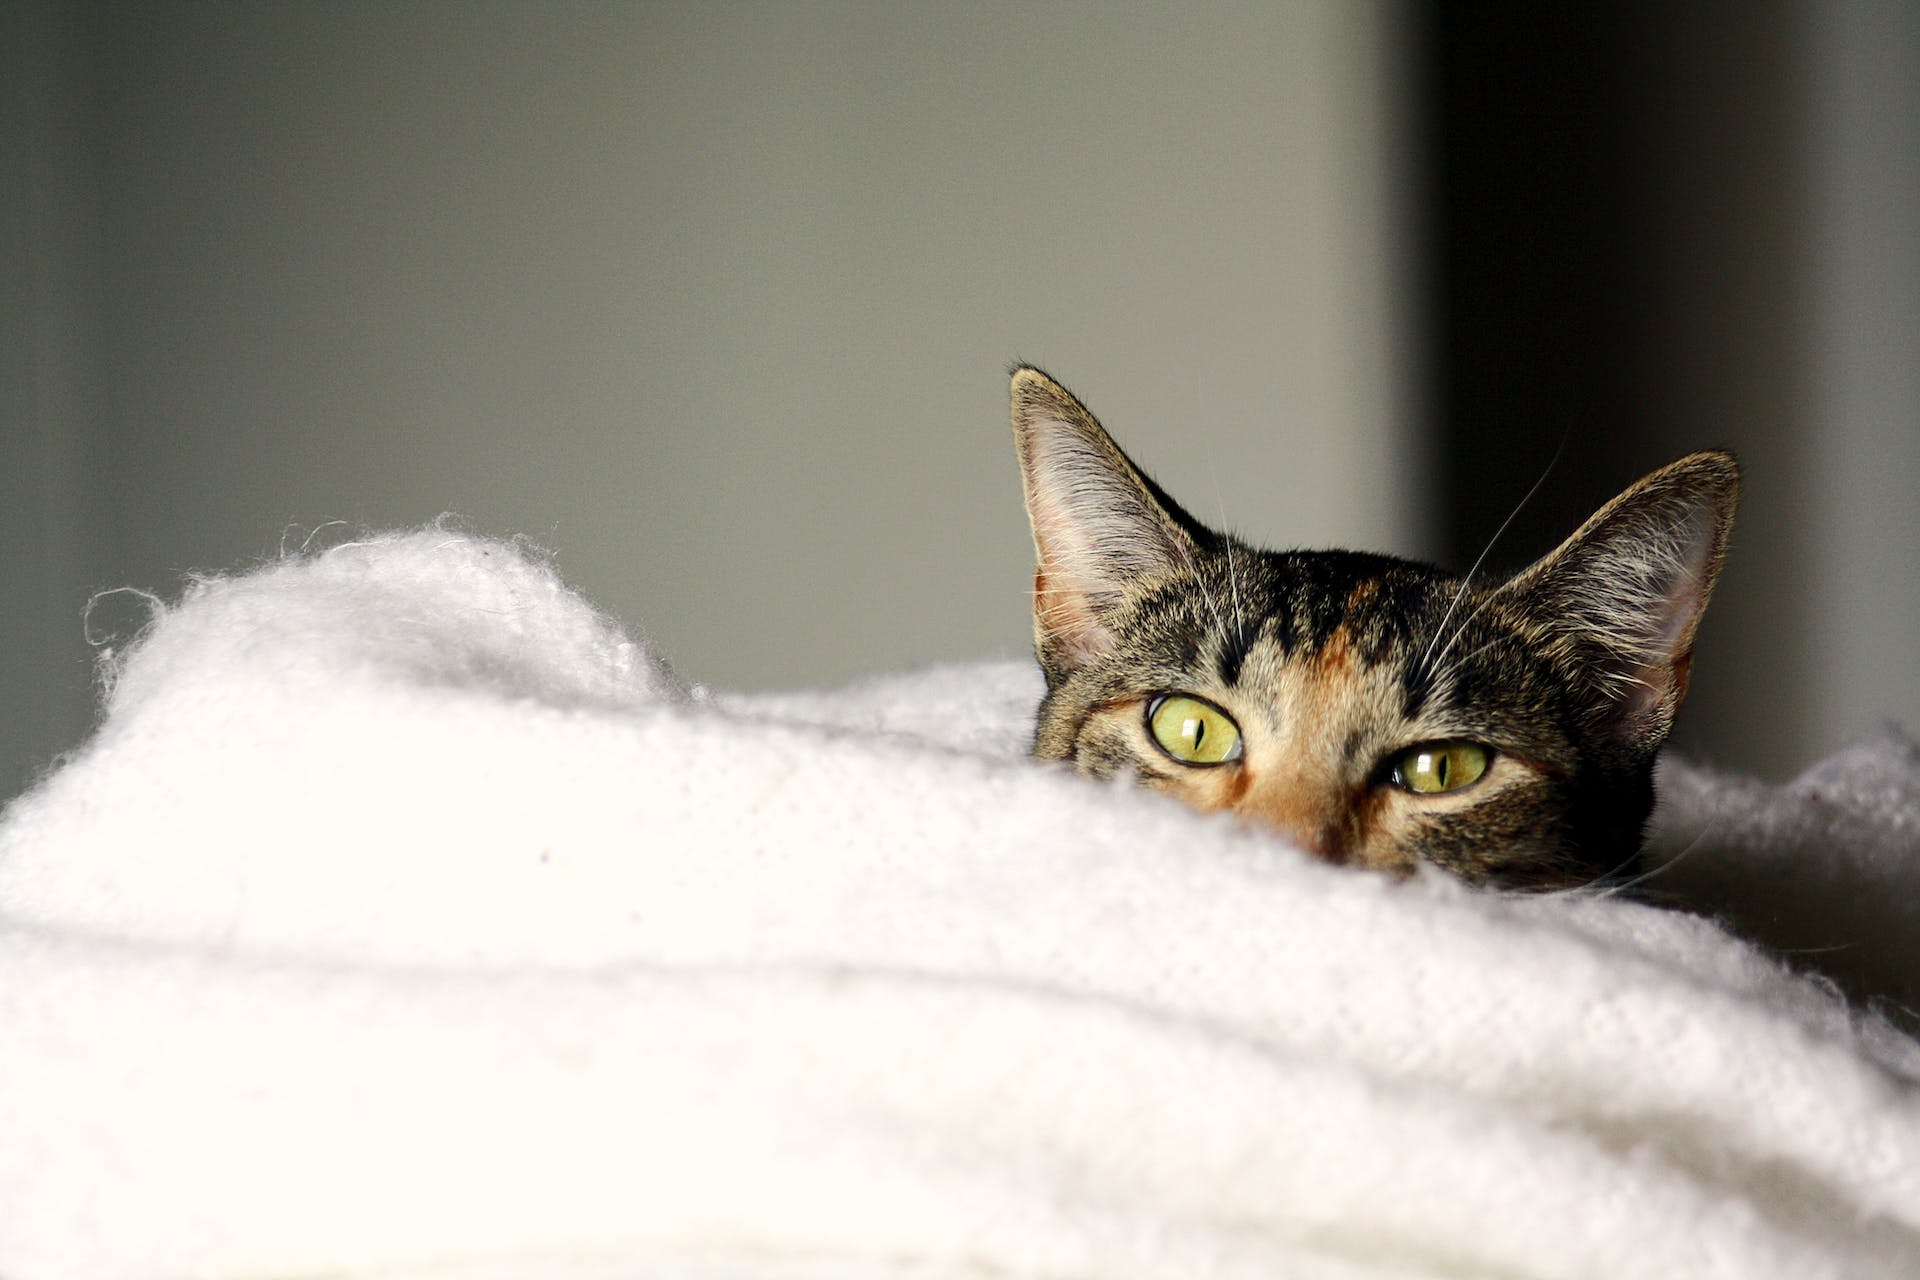 A cat snuggling into a soft blanket indoors